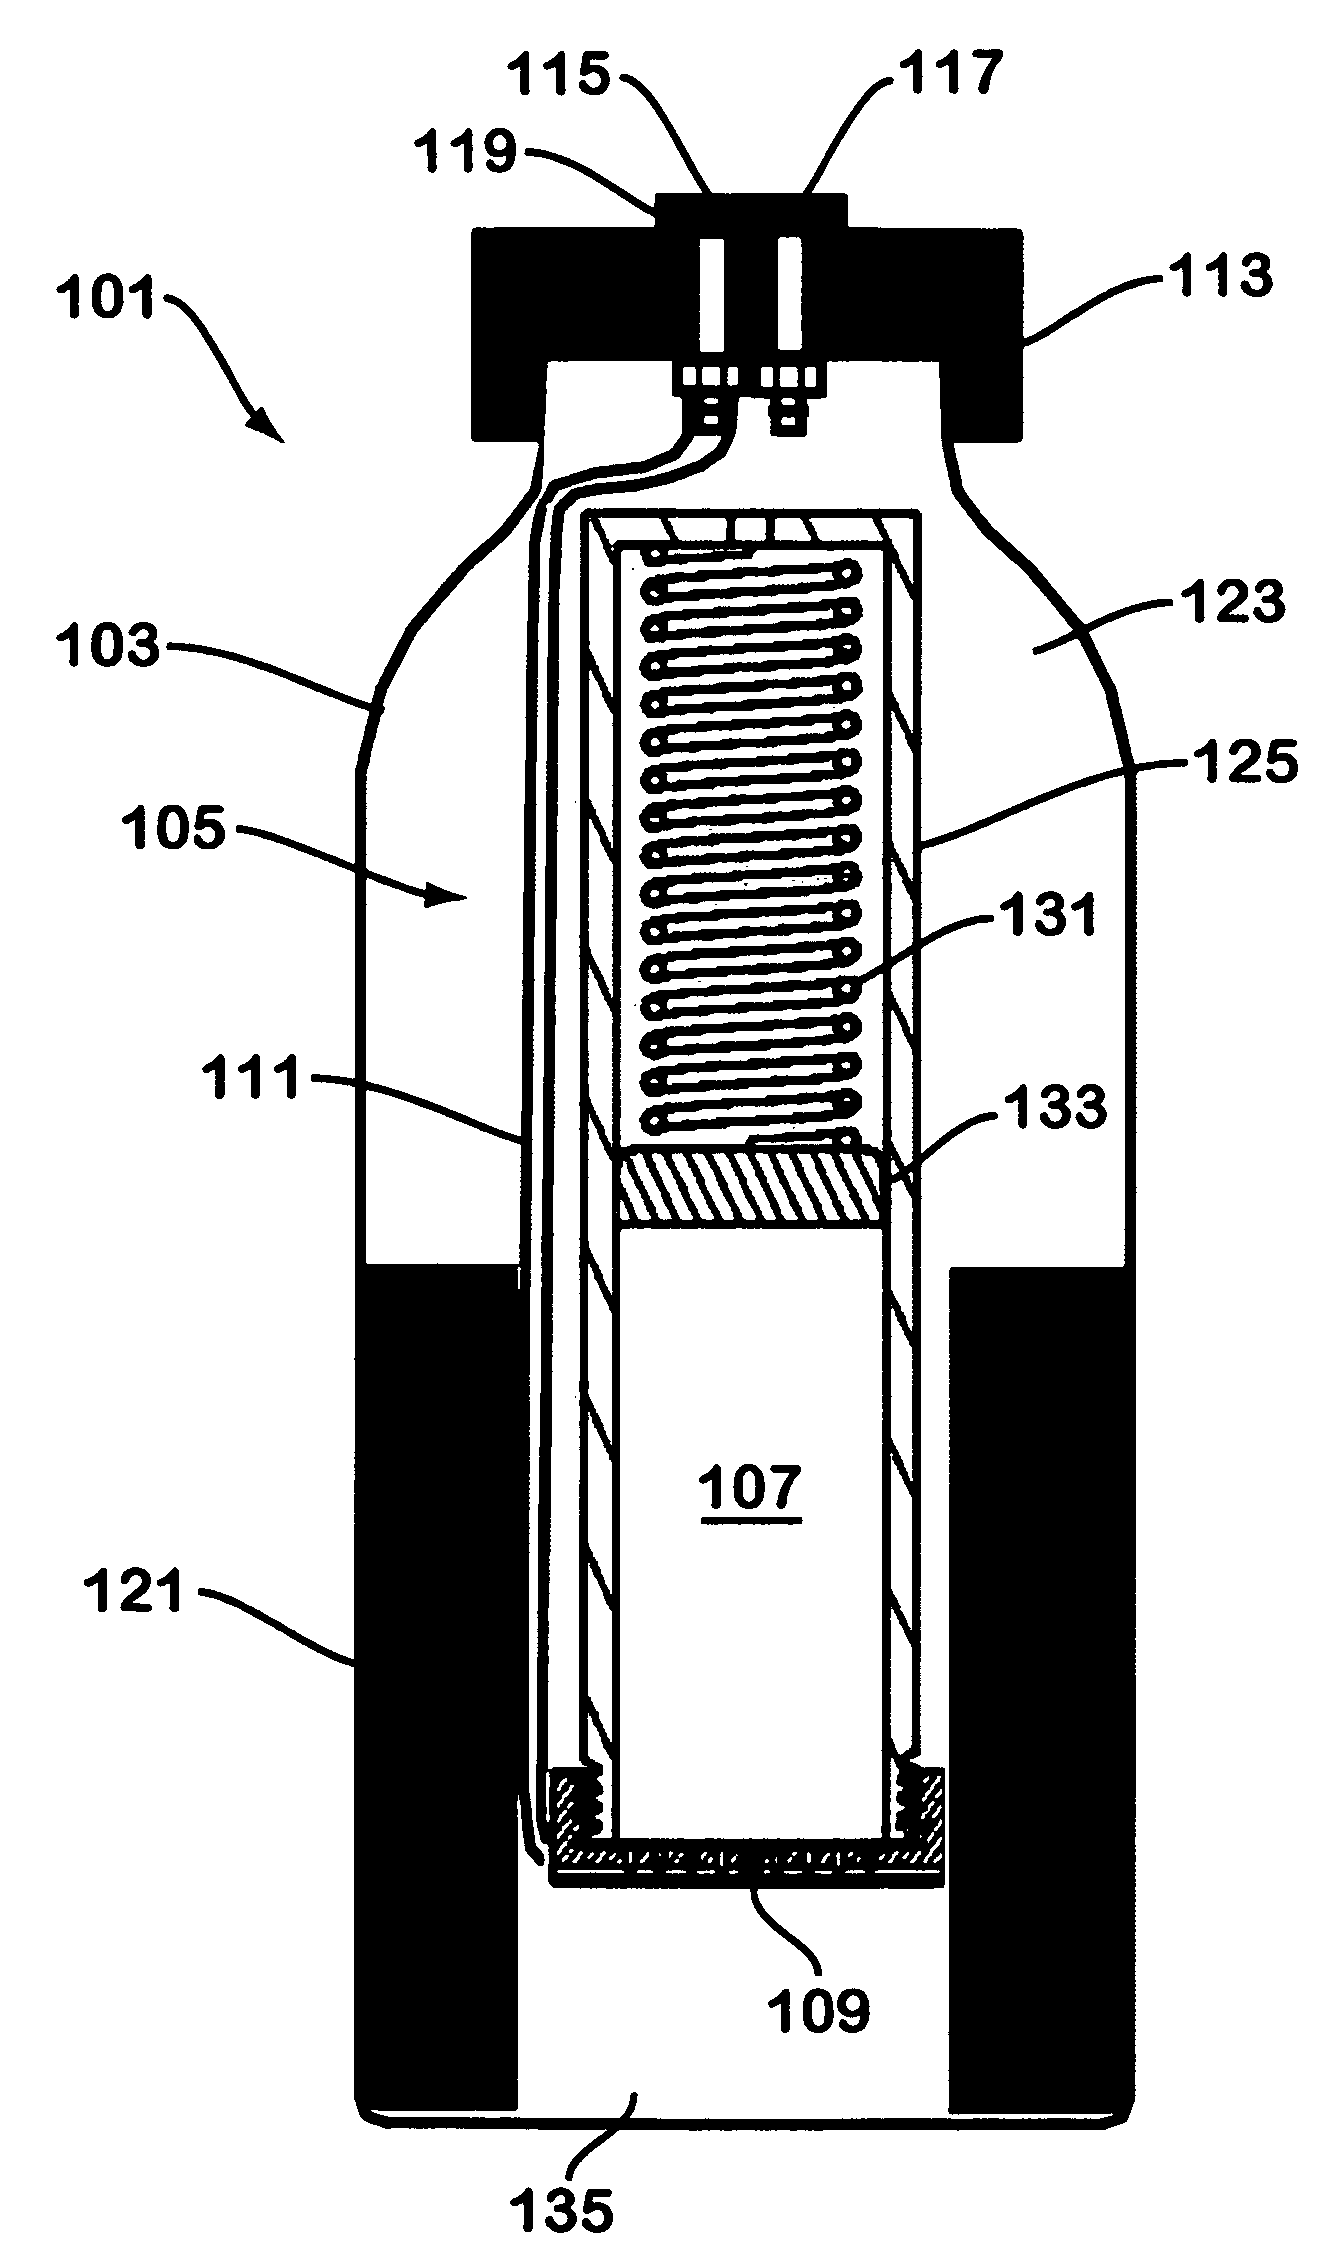 Solid chemical hydride dispenser for generating hydrogen gas